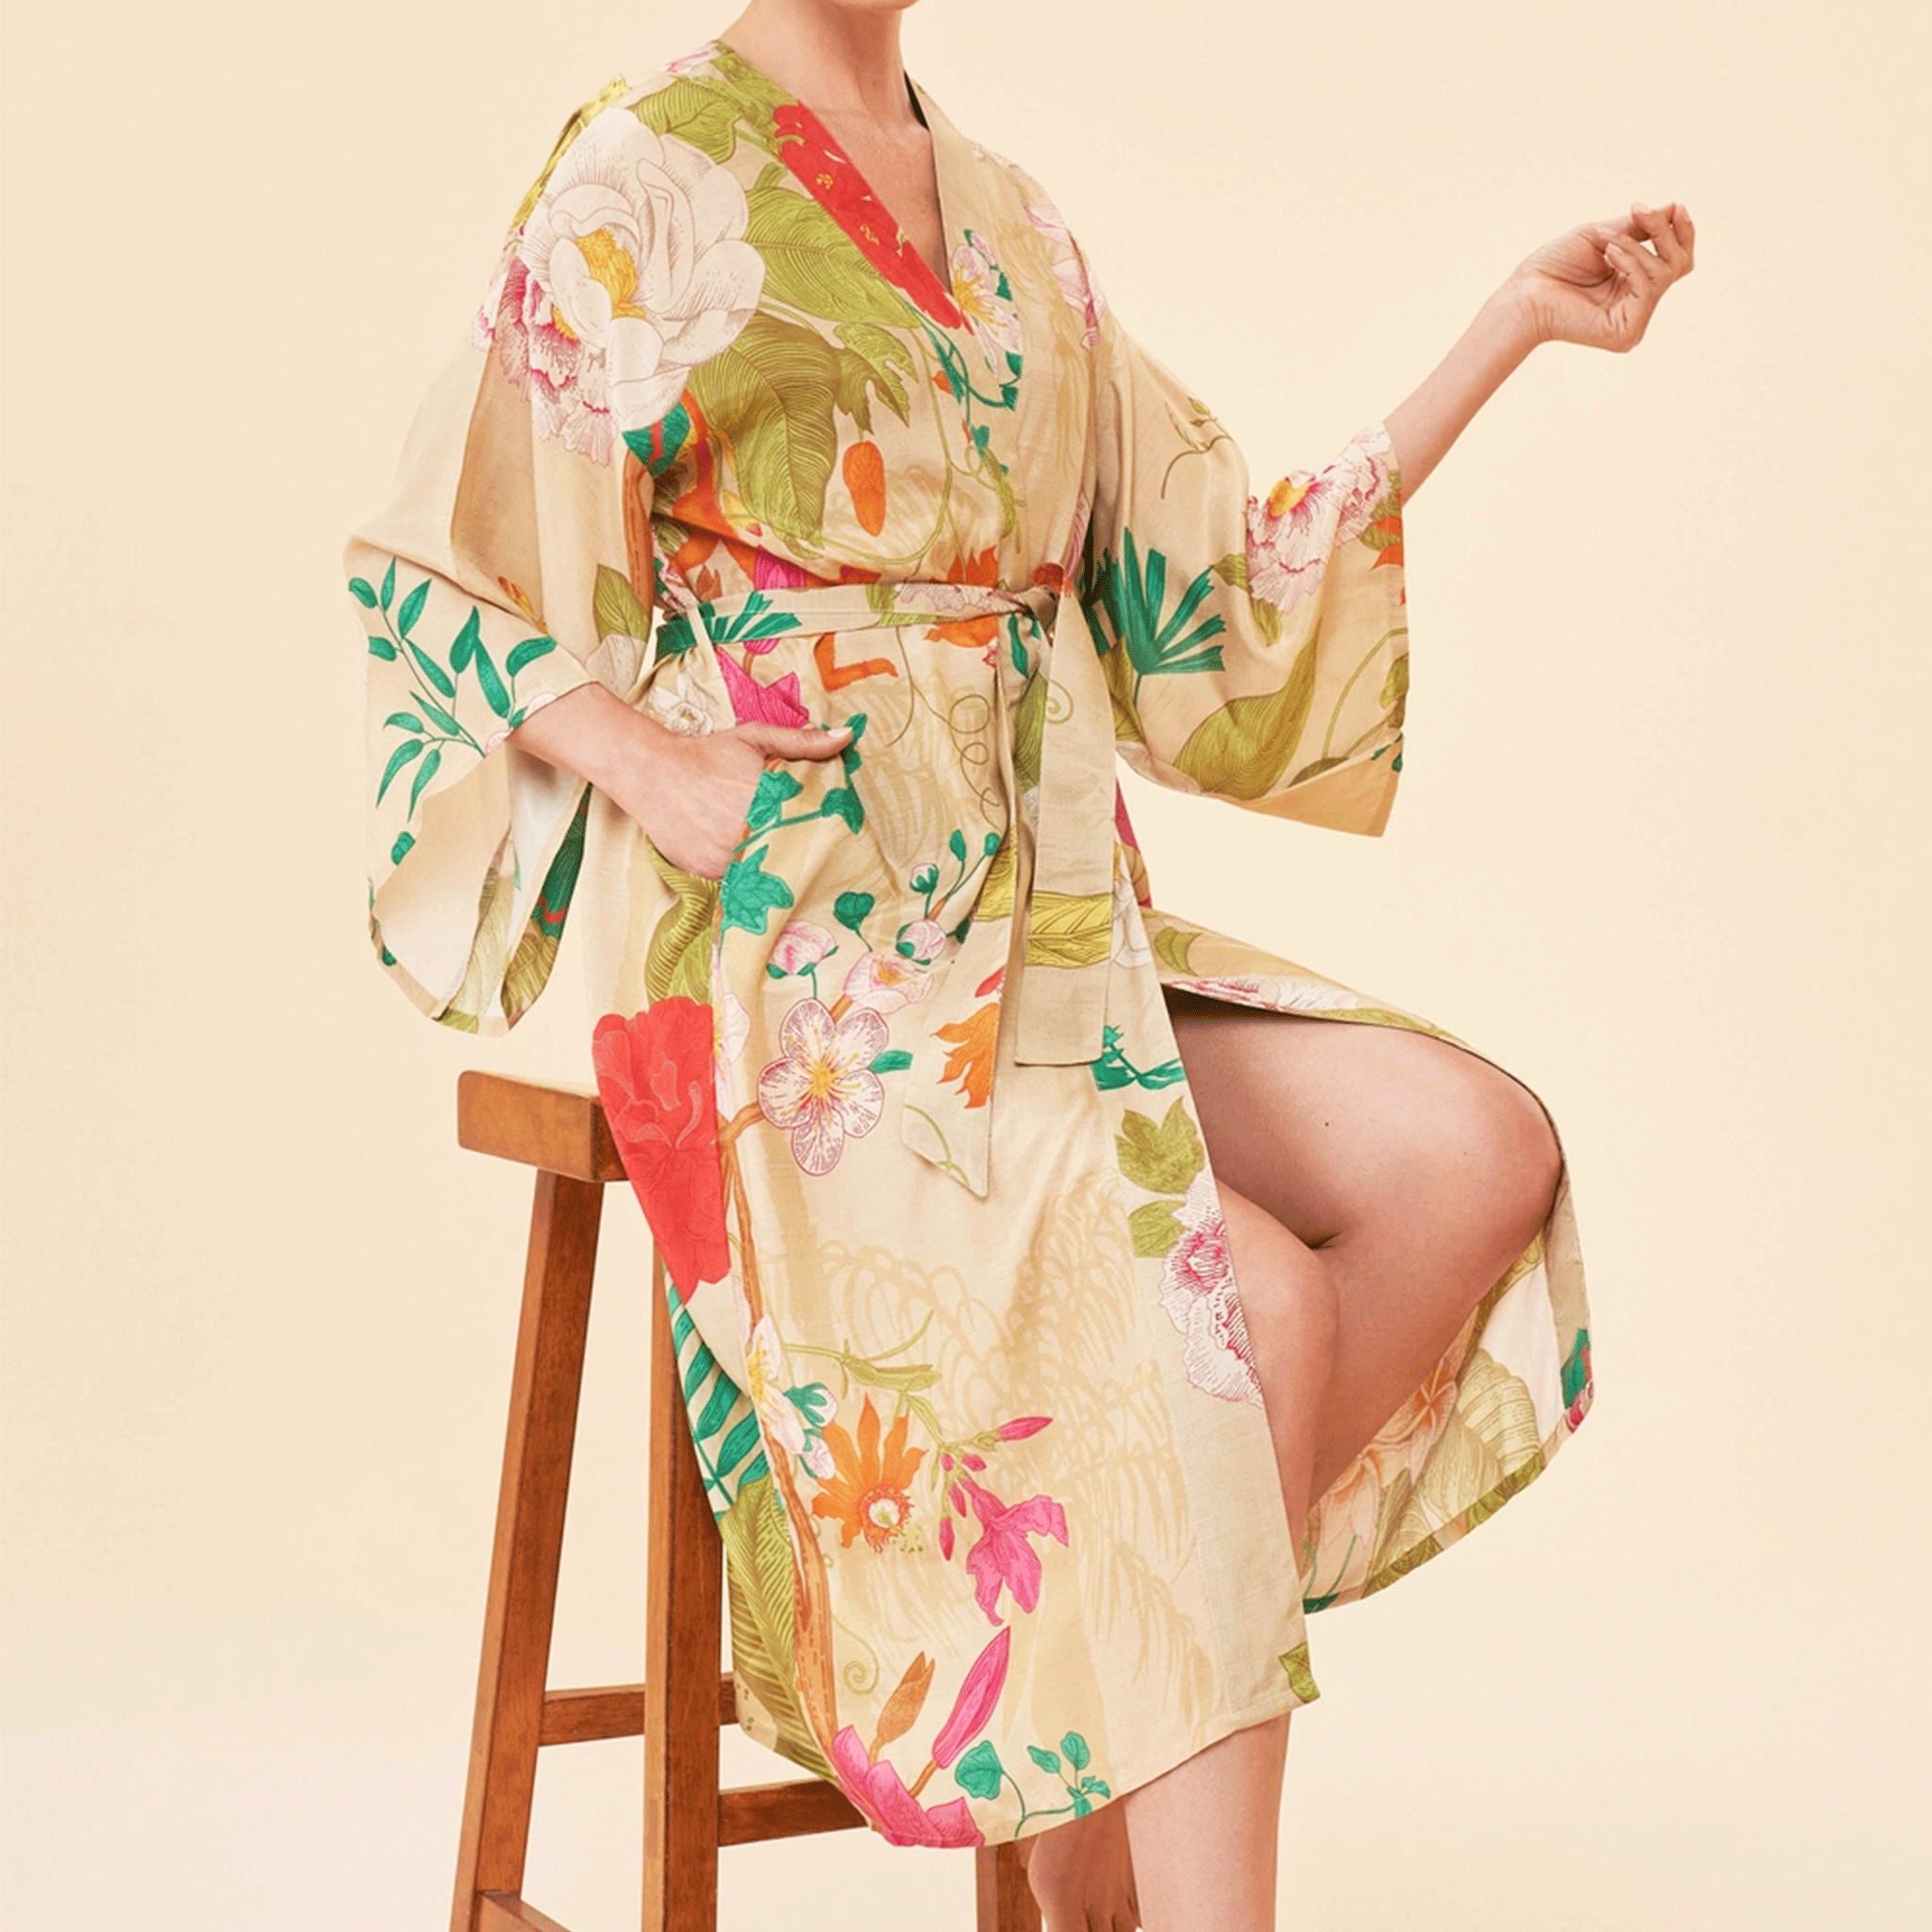 On a tan background is a model wearing a tan robe with a multicolored floral print.  